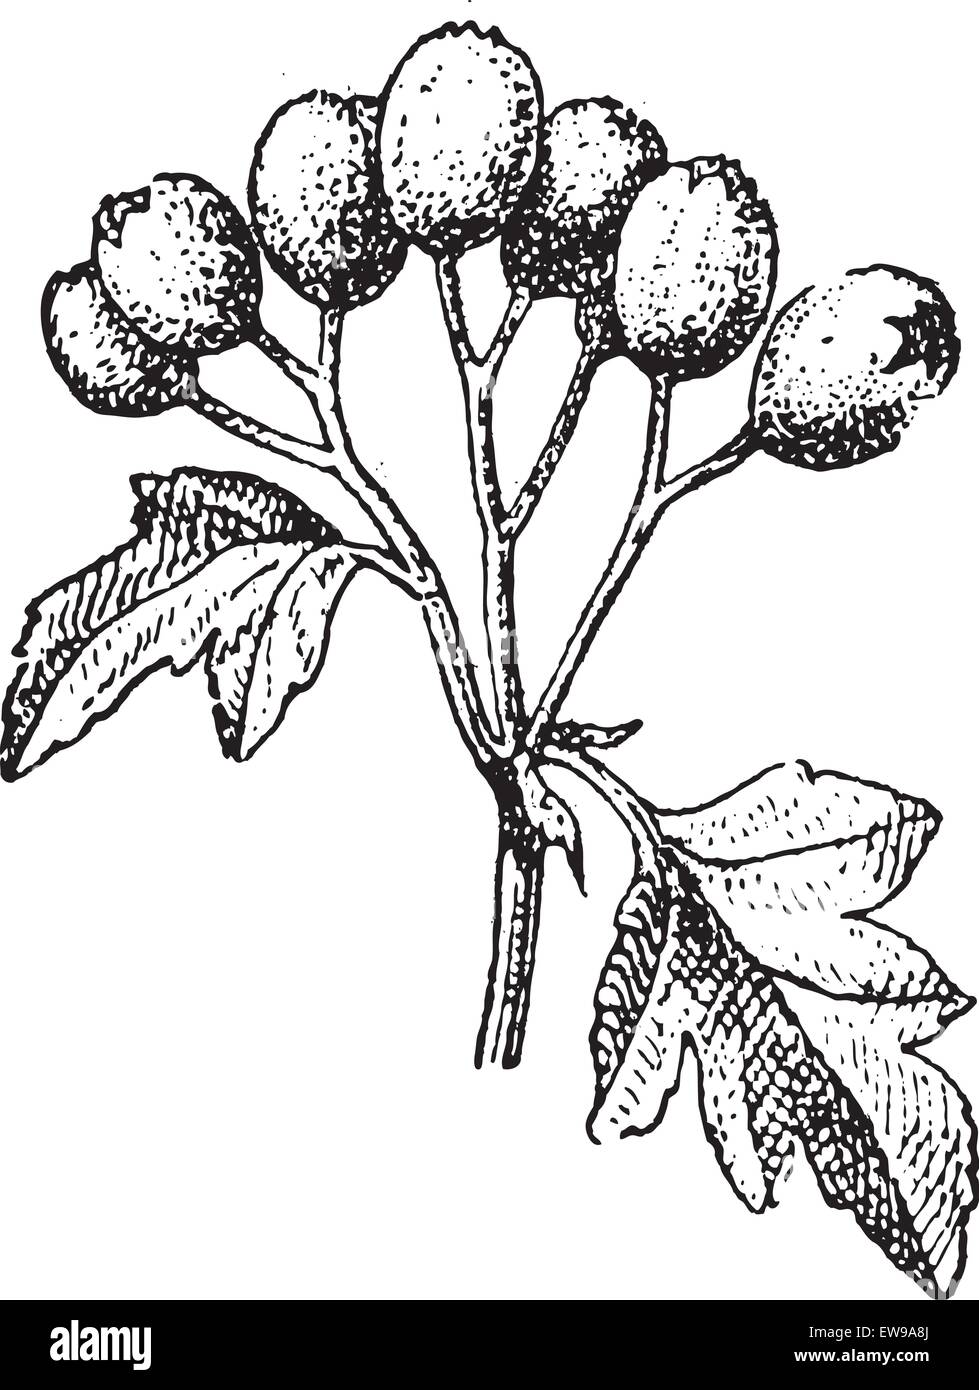 Old engraved illustration of Common hawthorn or Crataegus monogyna or single-seeded hawthorn or may or mayblossom or maythorn or Stock Vector